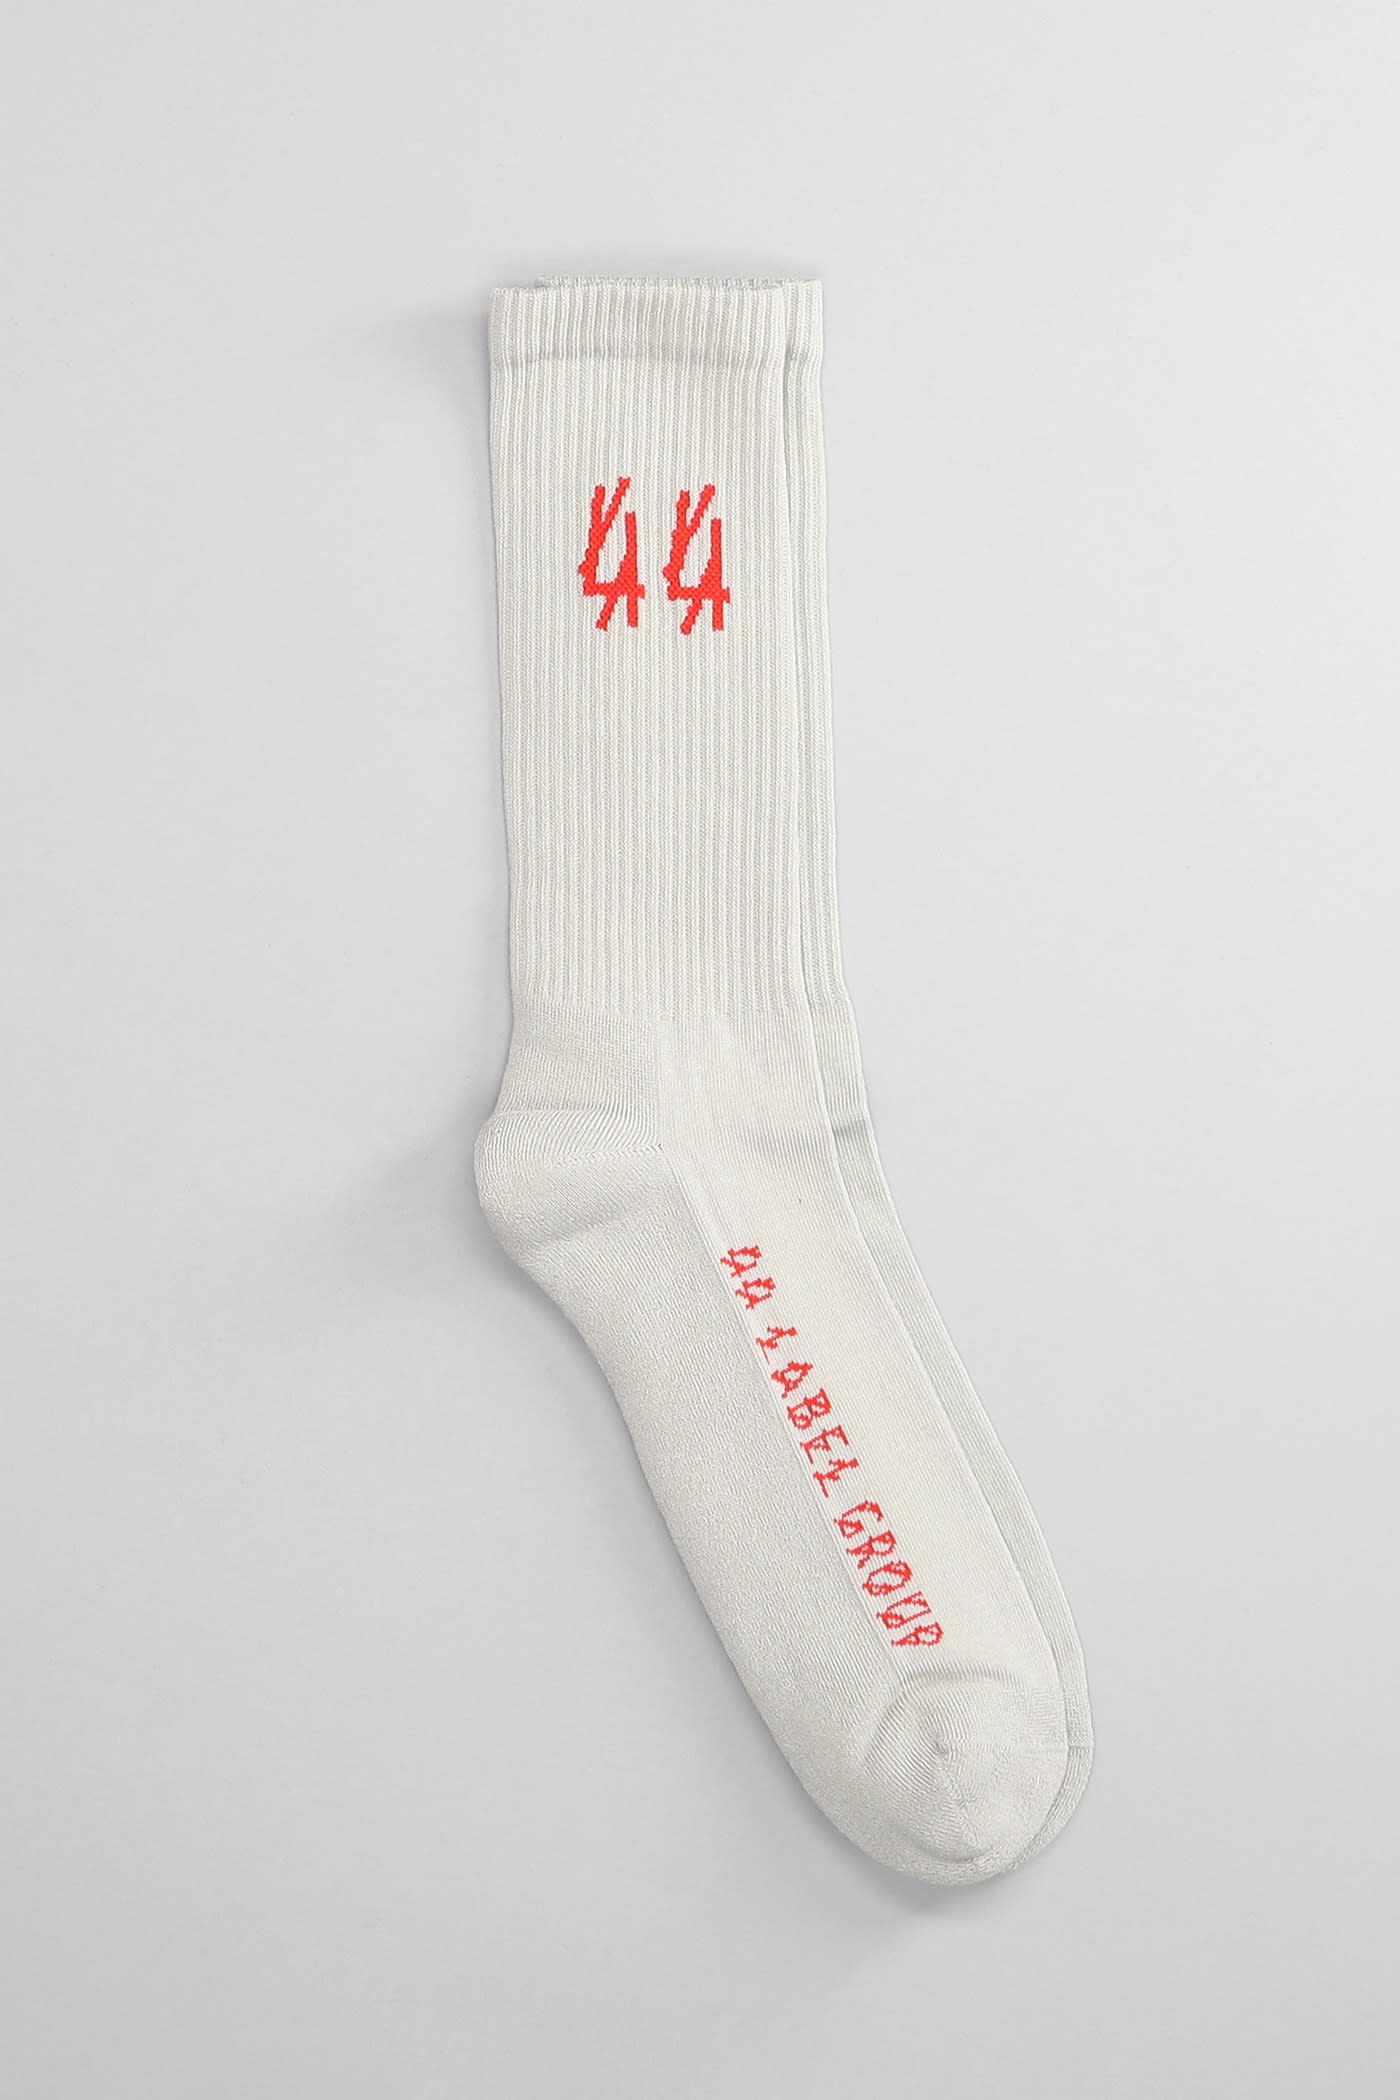 44 Label Group Socks In Grey Cotton